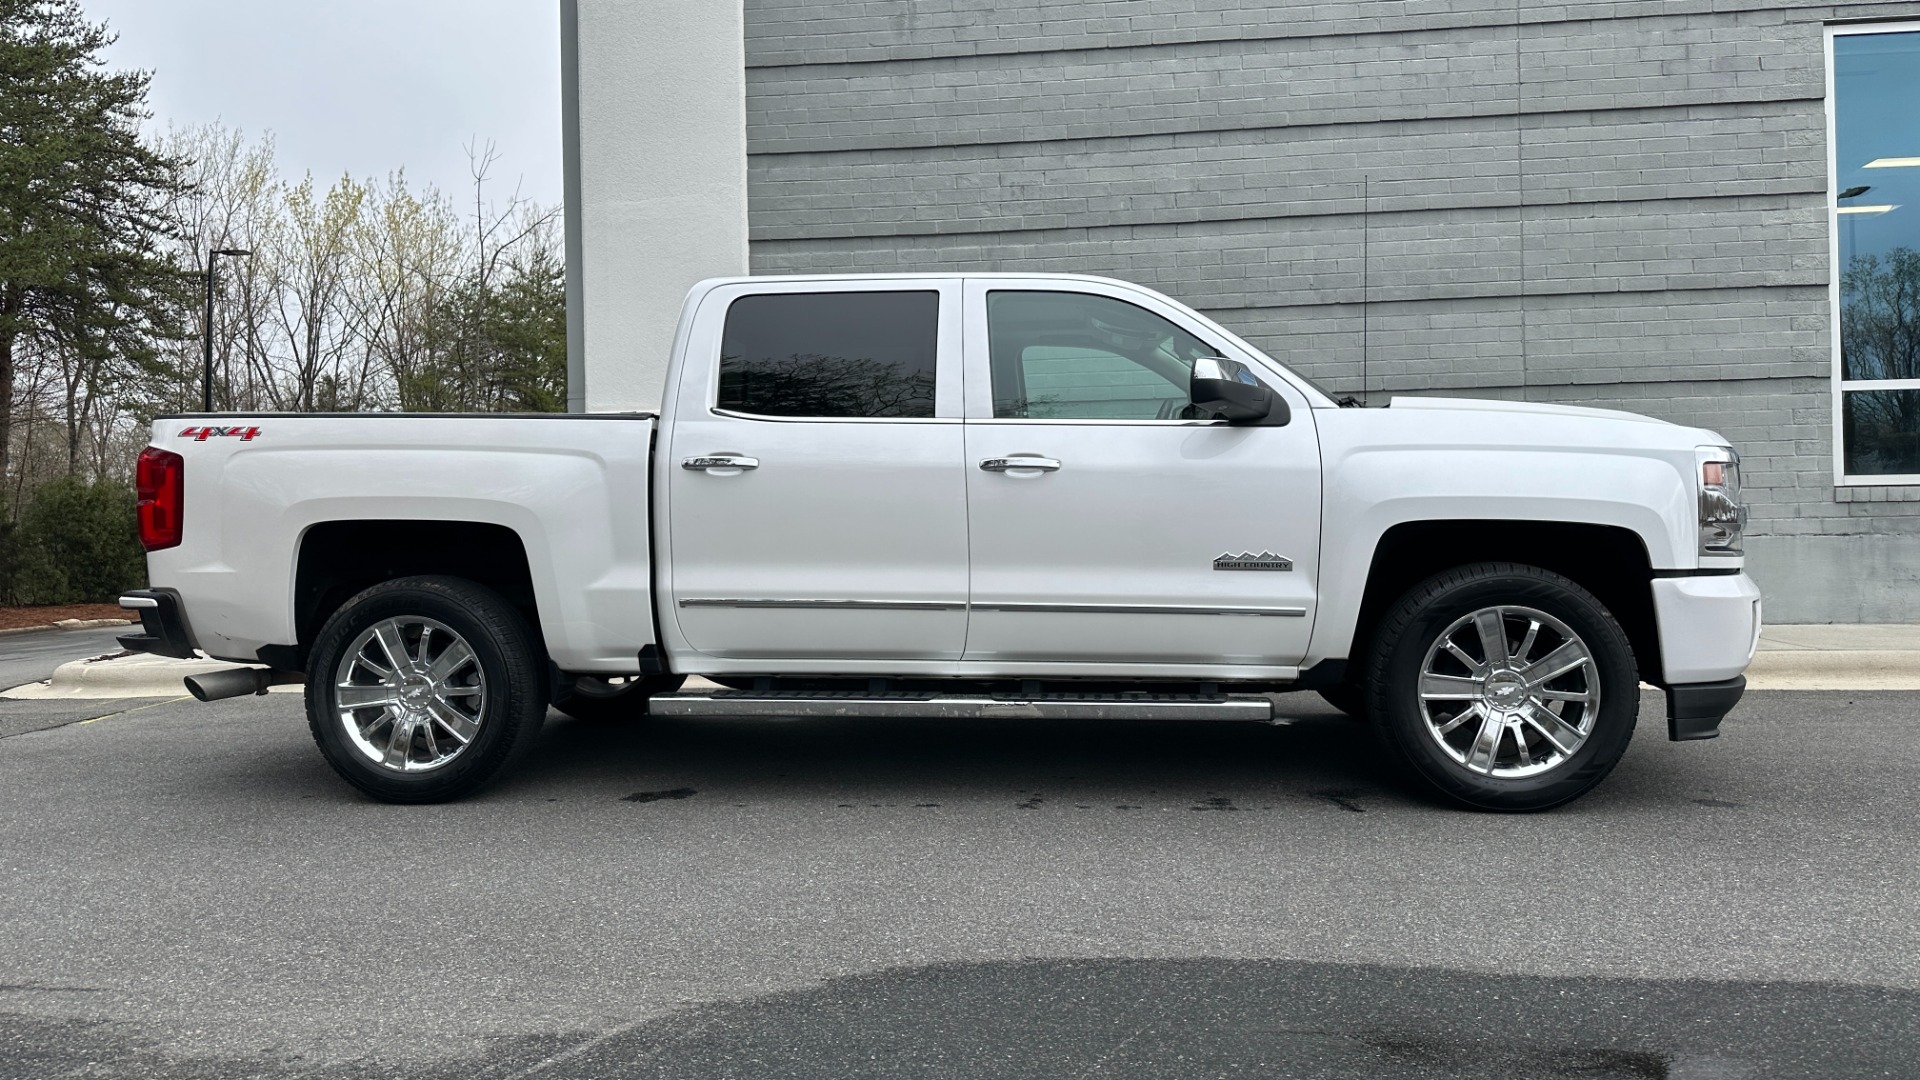 Used 2016 Chevrolet Silverado 1500 HIGH COUNTRY / PREMIUM PACKAGE / PEARL PAINT / SUNROOF / 4X4 for sale Sold at Formula Imports in Charlotte NC 28227 6